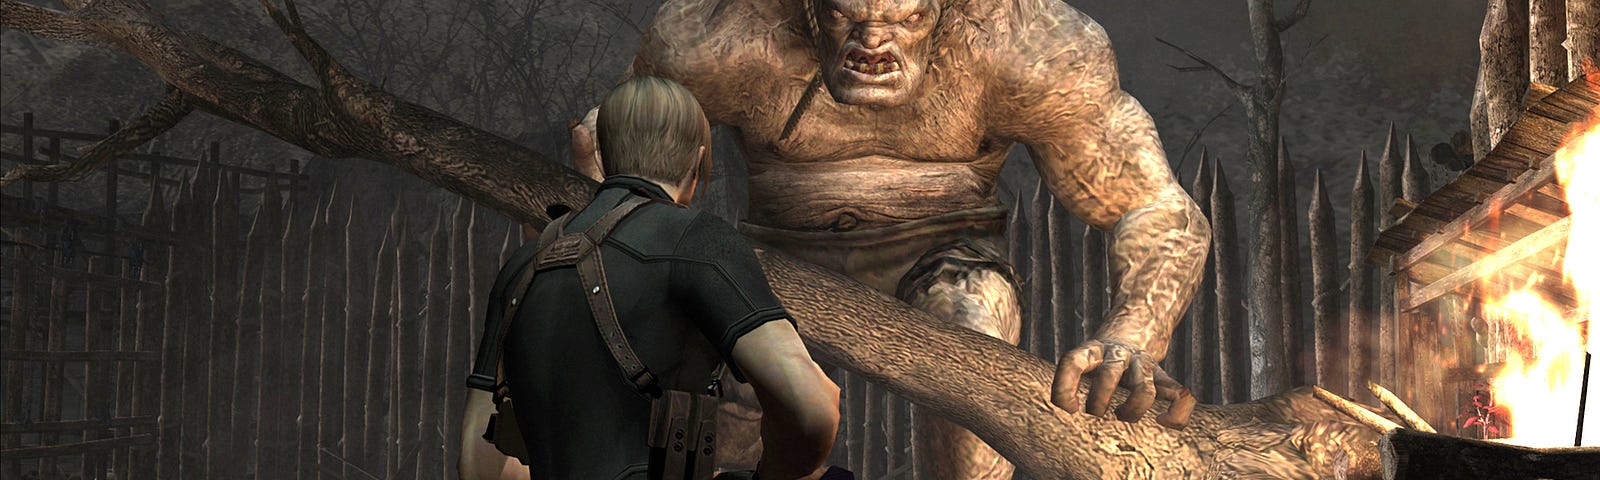 A pre-Resident Evil 1 beta is available, thanks to the fans, by Can Hoang  Tran